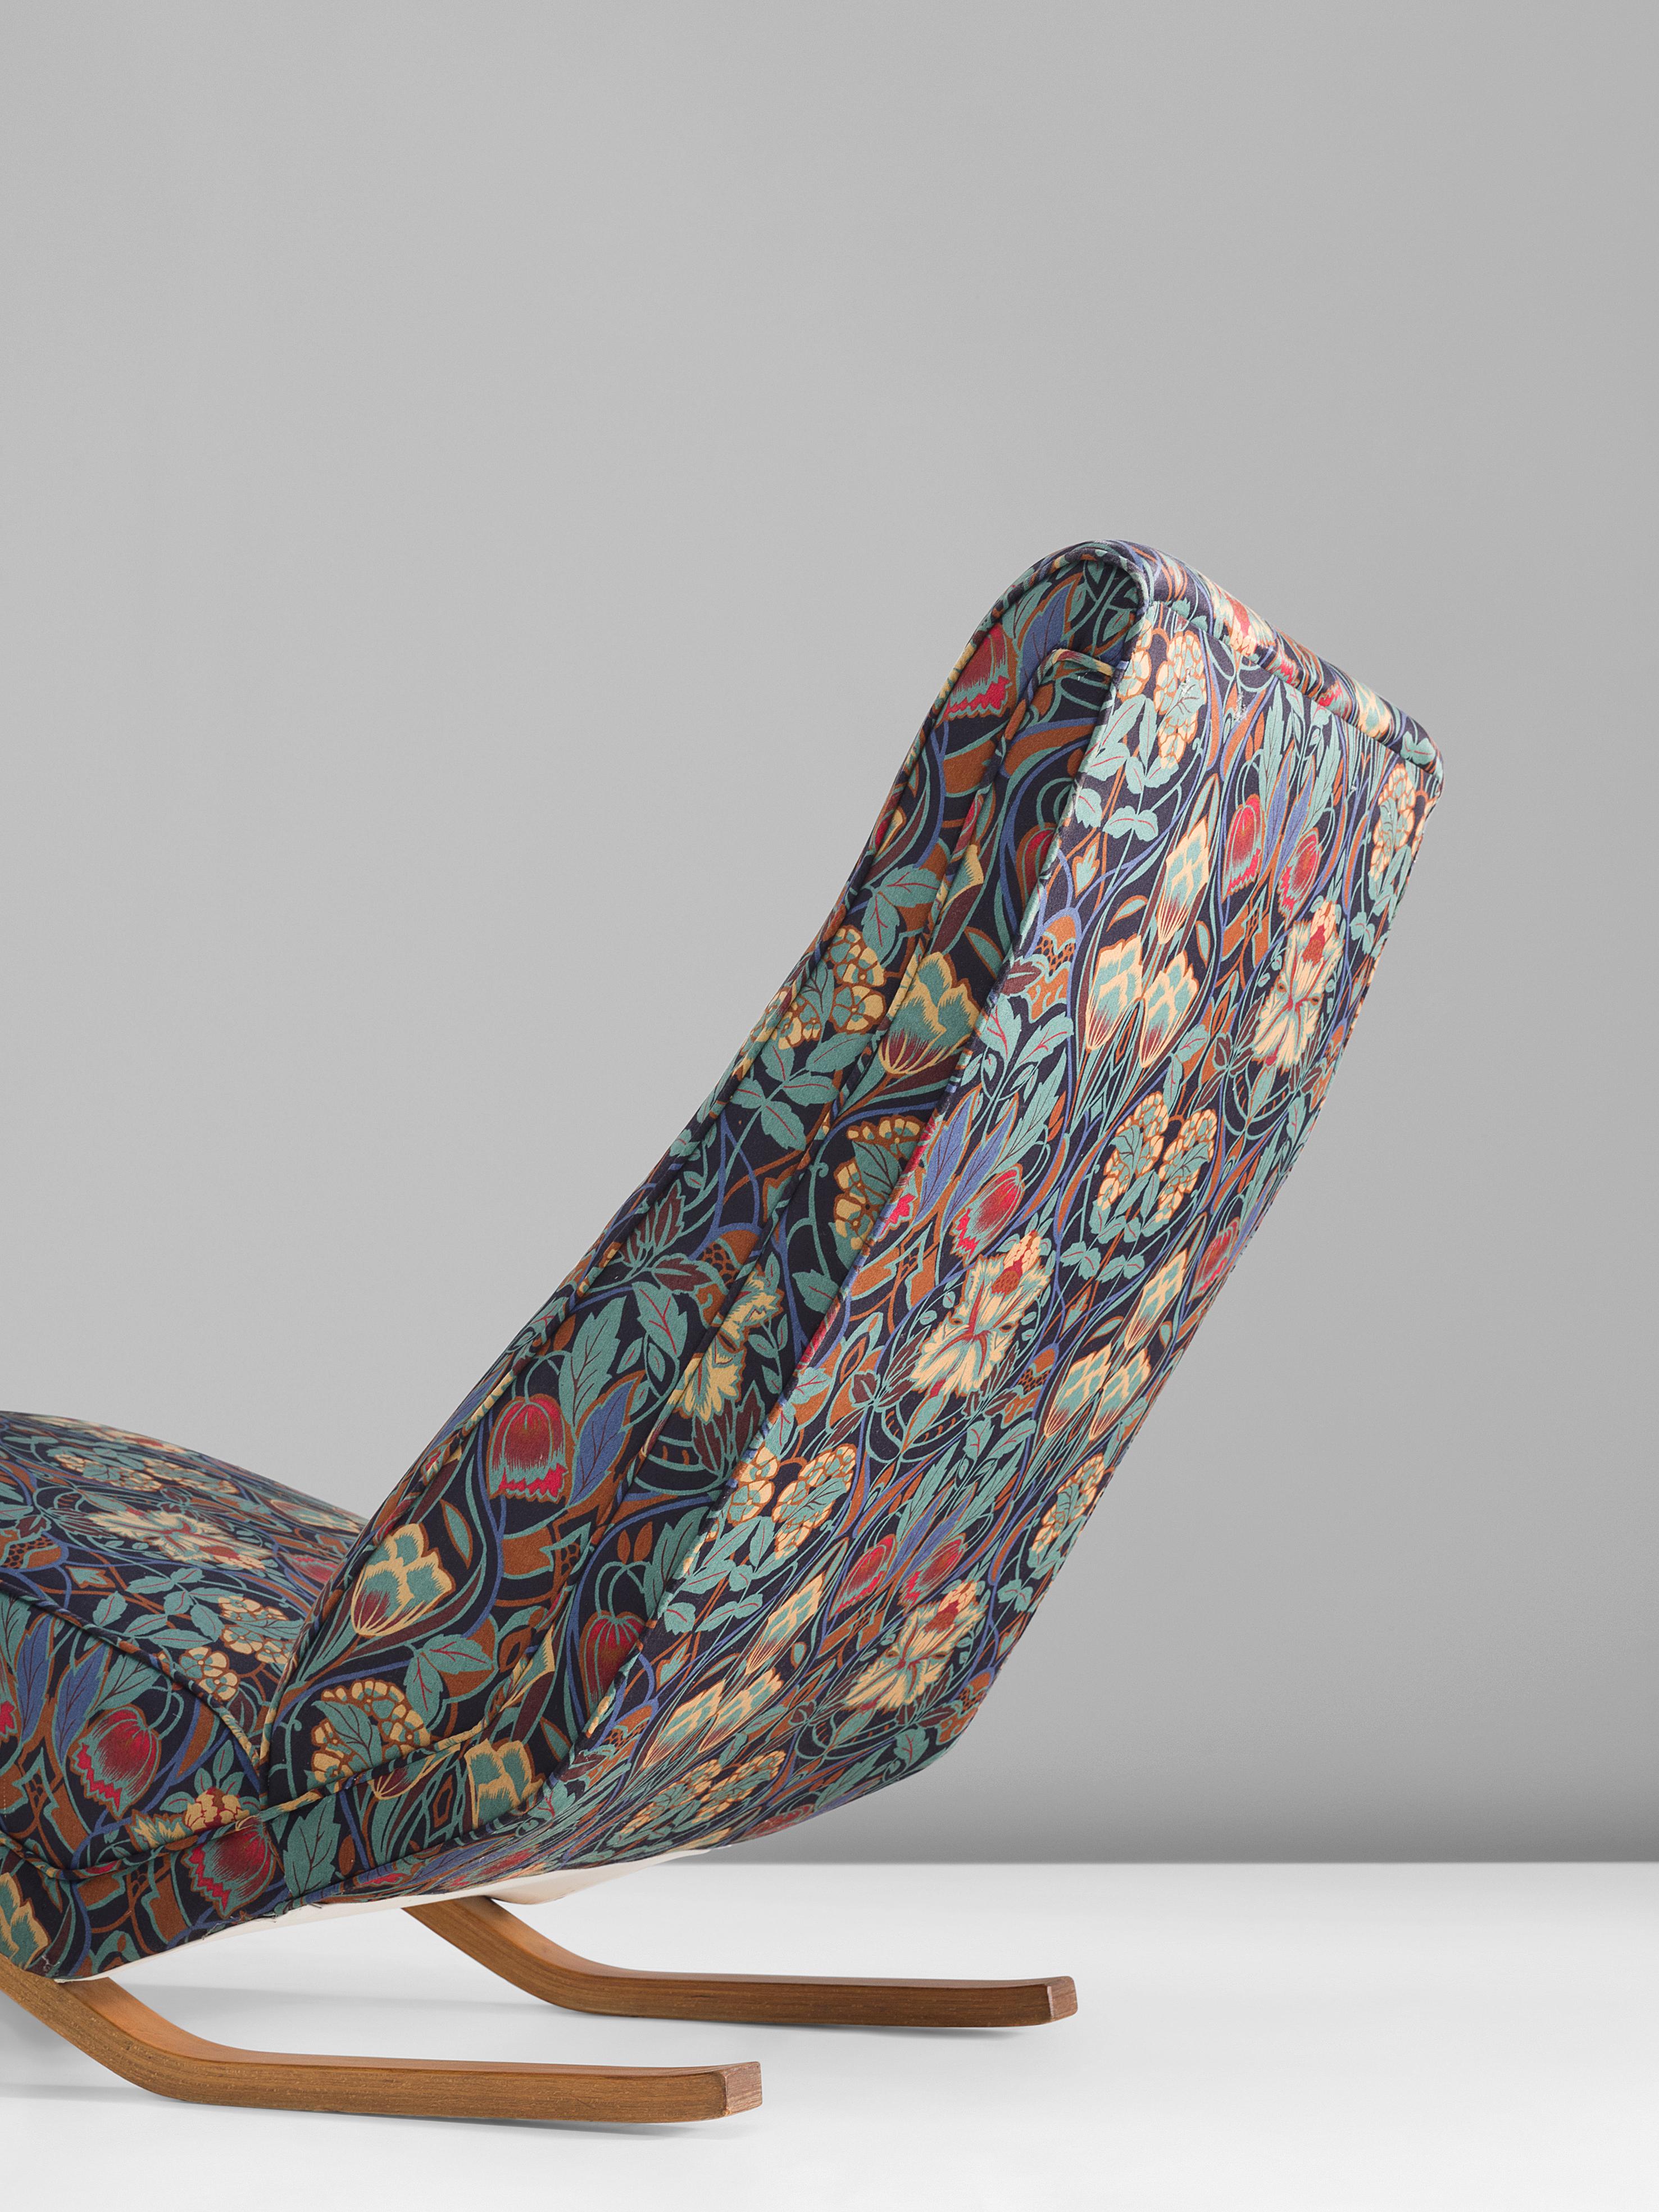 Andrew J. Milne Chaise Lounge in Beech and Floral Fabric 2